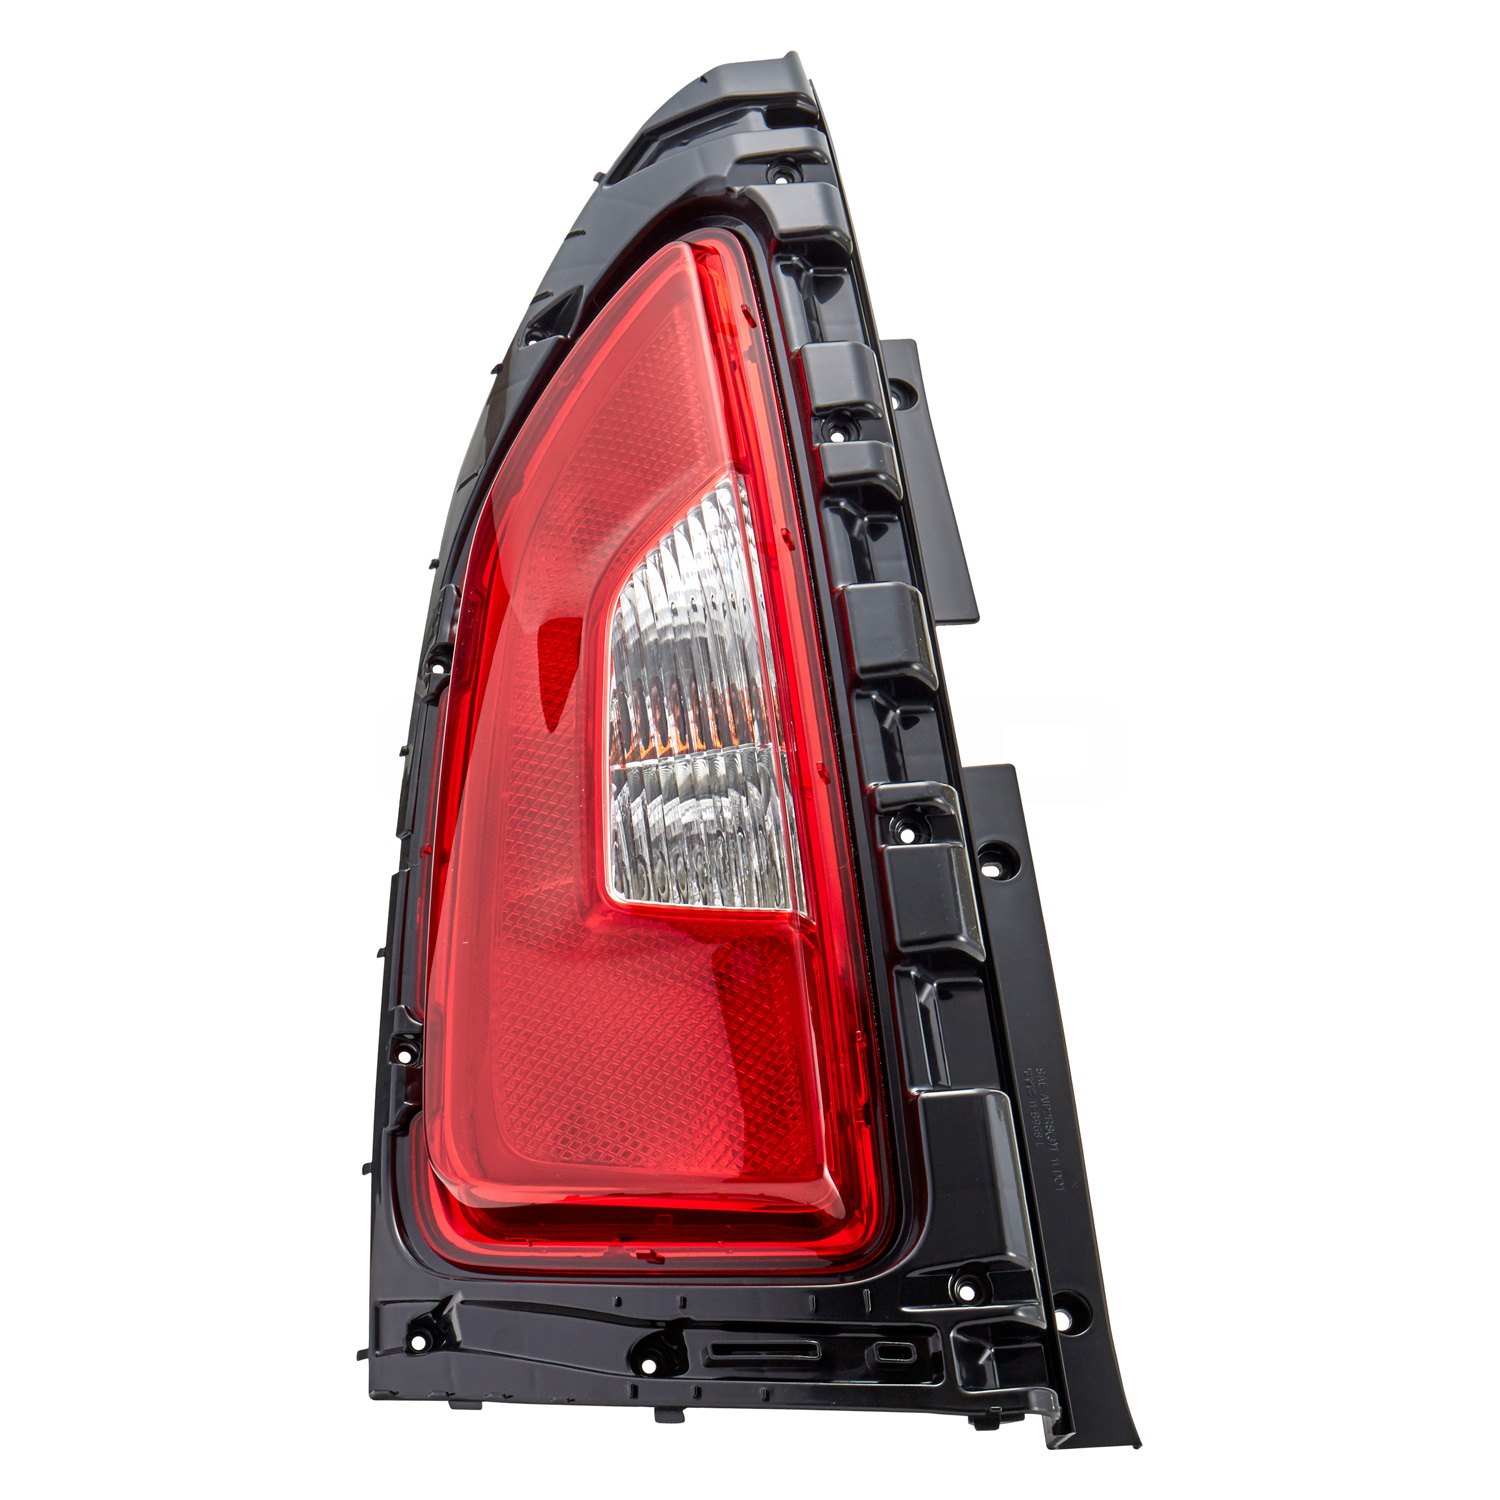 For Kia Soul 2012-2013 TYC 11-11968-00-9 Driver Side Replacement Tail Light | eBay 2013 Kia Soul Tail Light Bulb Replacement